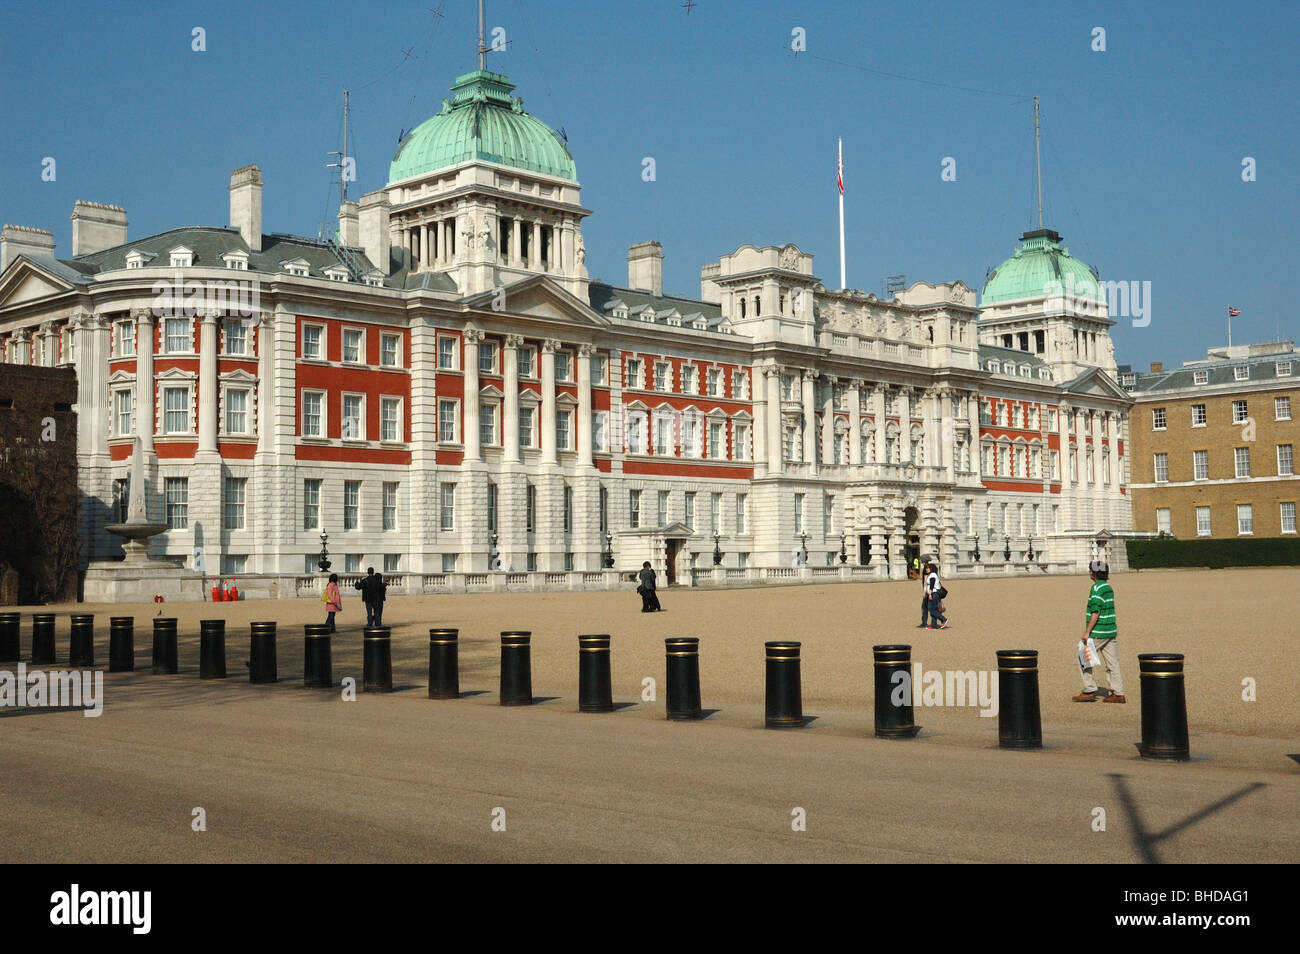 Old Admiralty building on Horse Guards Parade.  London UK... Stock Photo